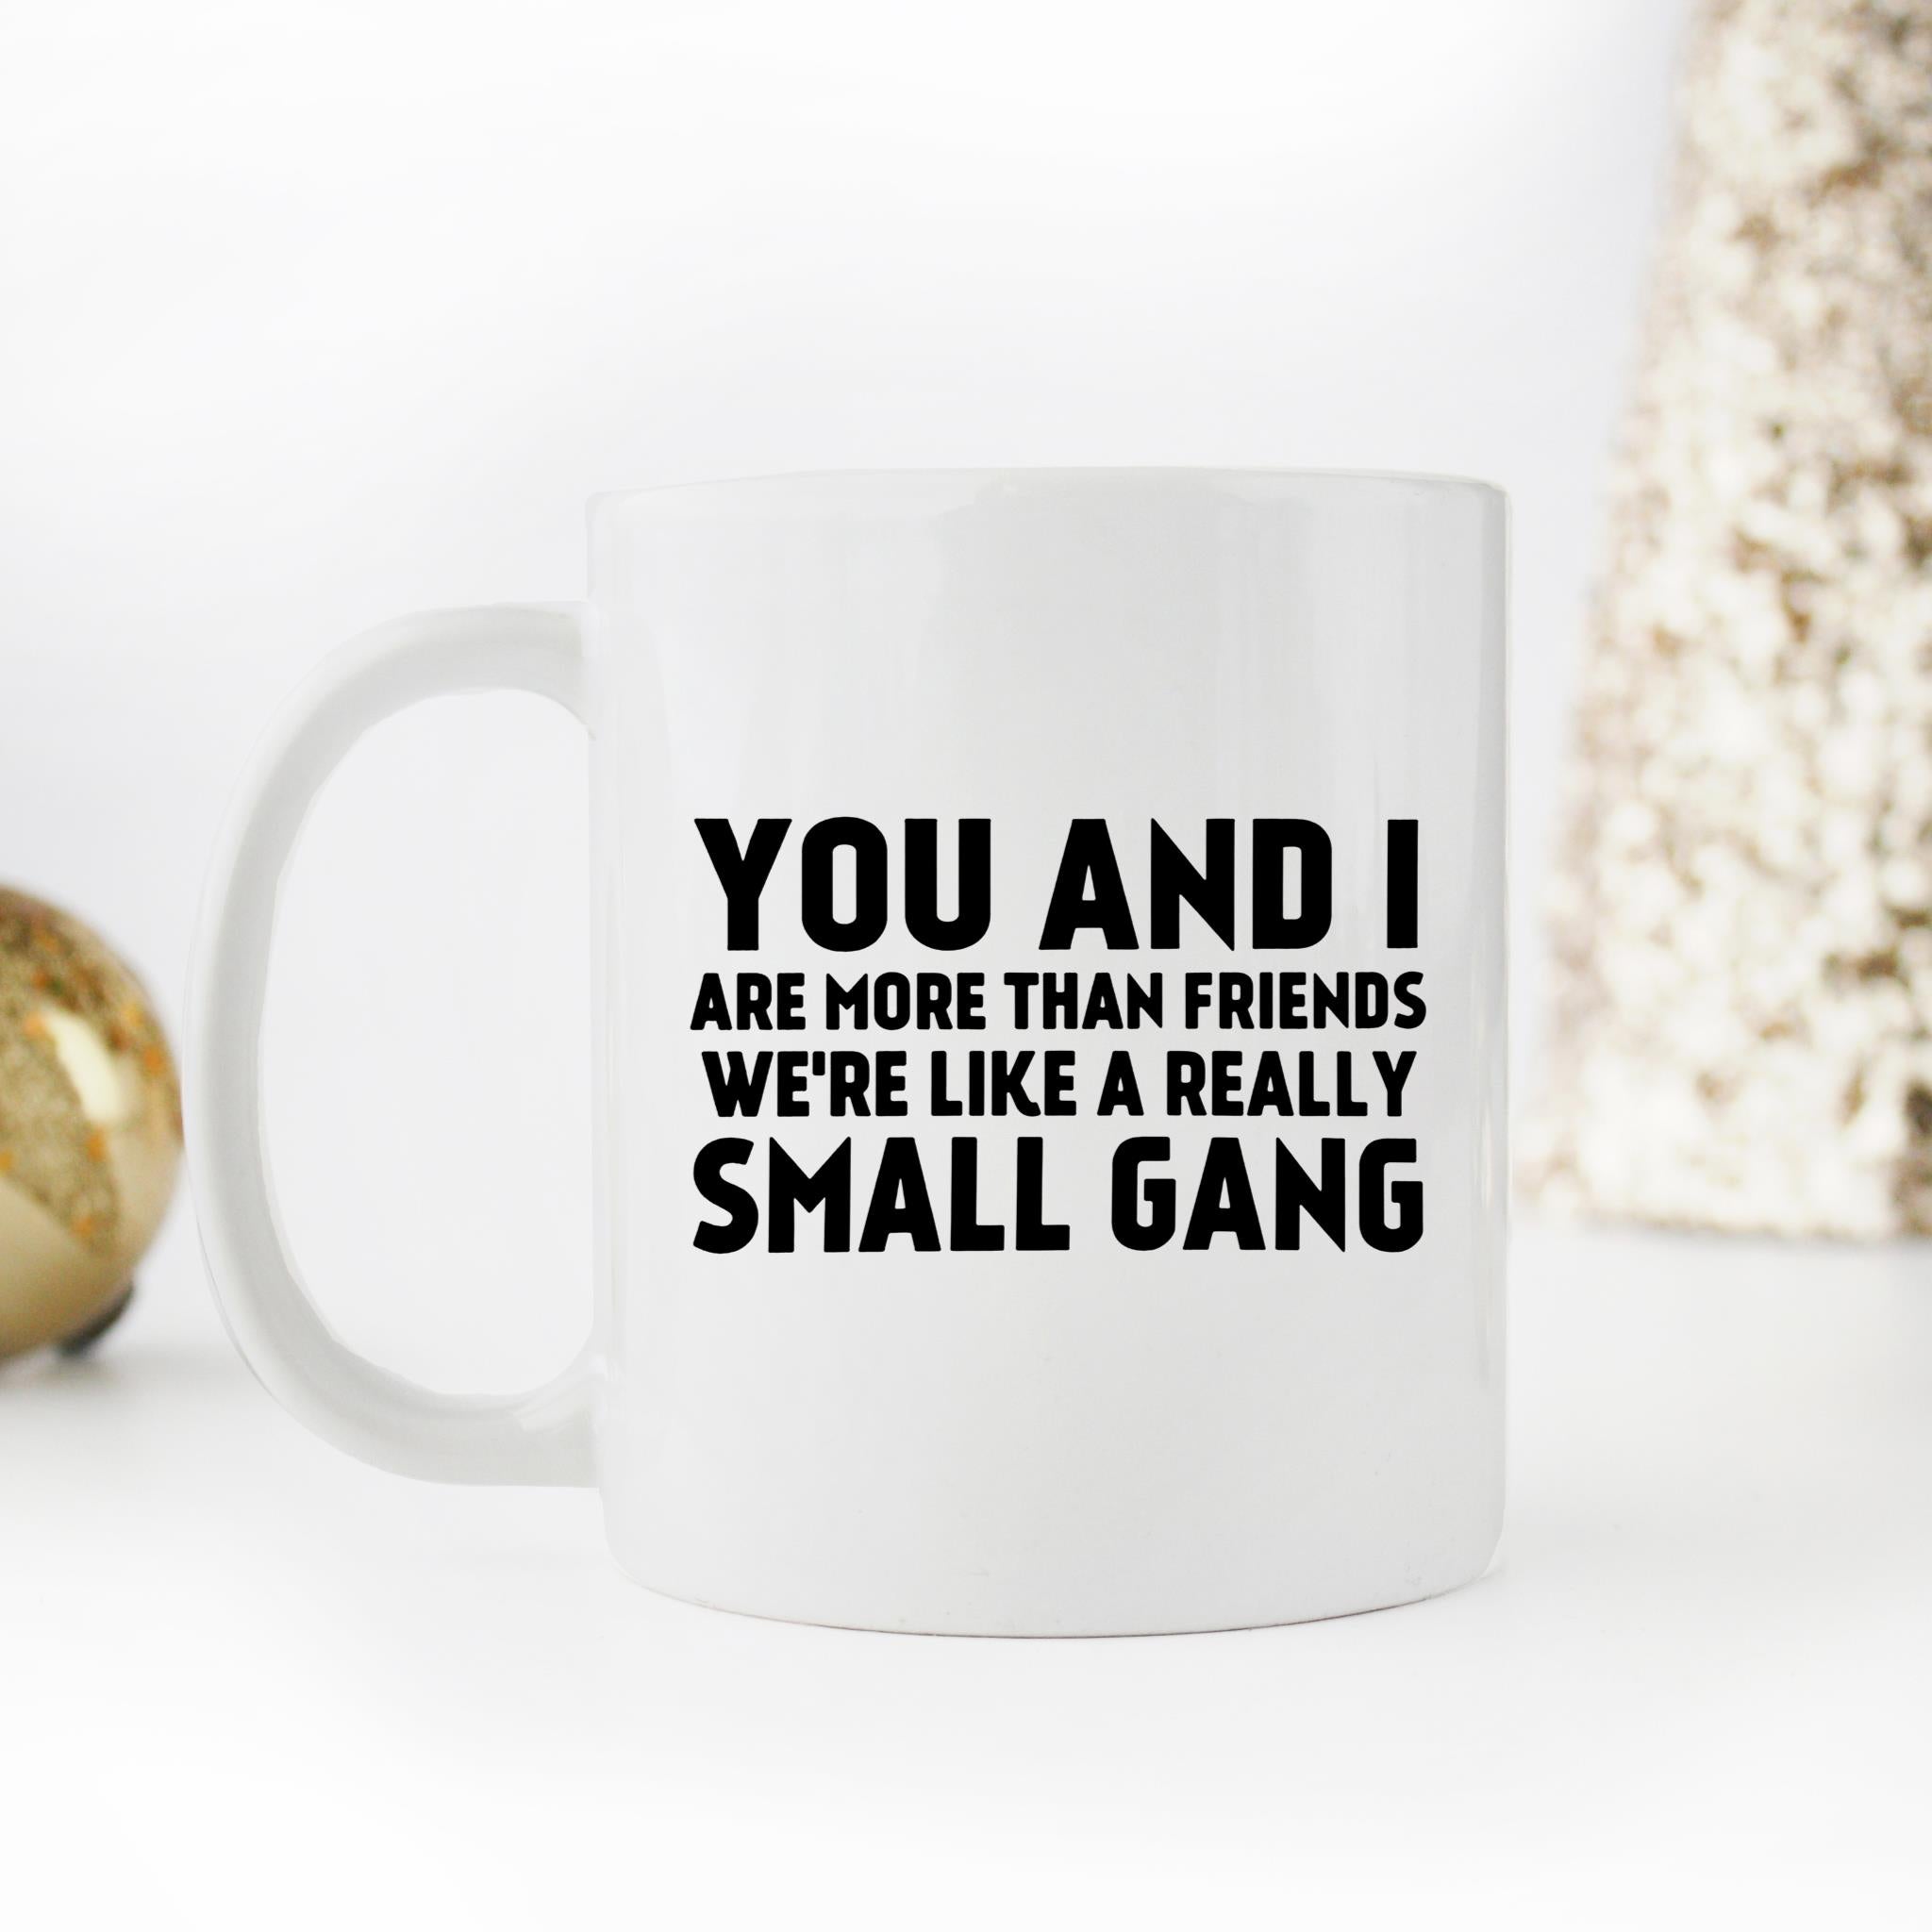 Skitongifts Funny Ceramic Novelty Coffee Mug You And I More Than Frienads Like Small Gang Funny b20HRBt